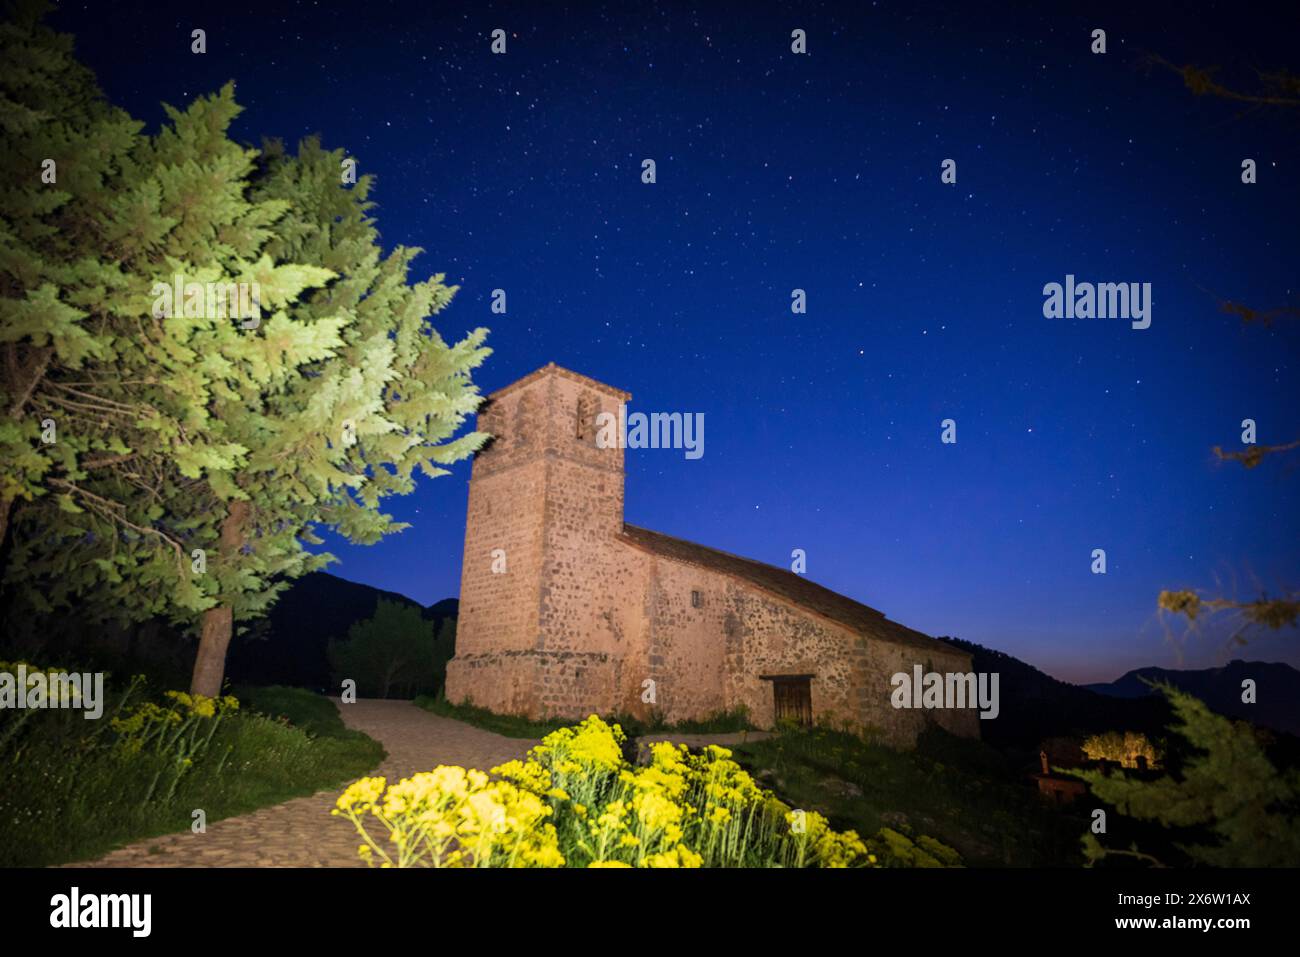 old church of the Holy Spirit and starry sky, stellar viewing point of the star route in Sierra de Segura, Riópar Viejo ,Albacete province, Castilla-La Mancha, Spain. Stock Photo